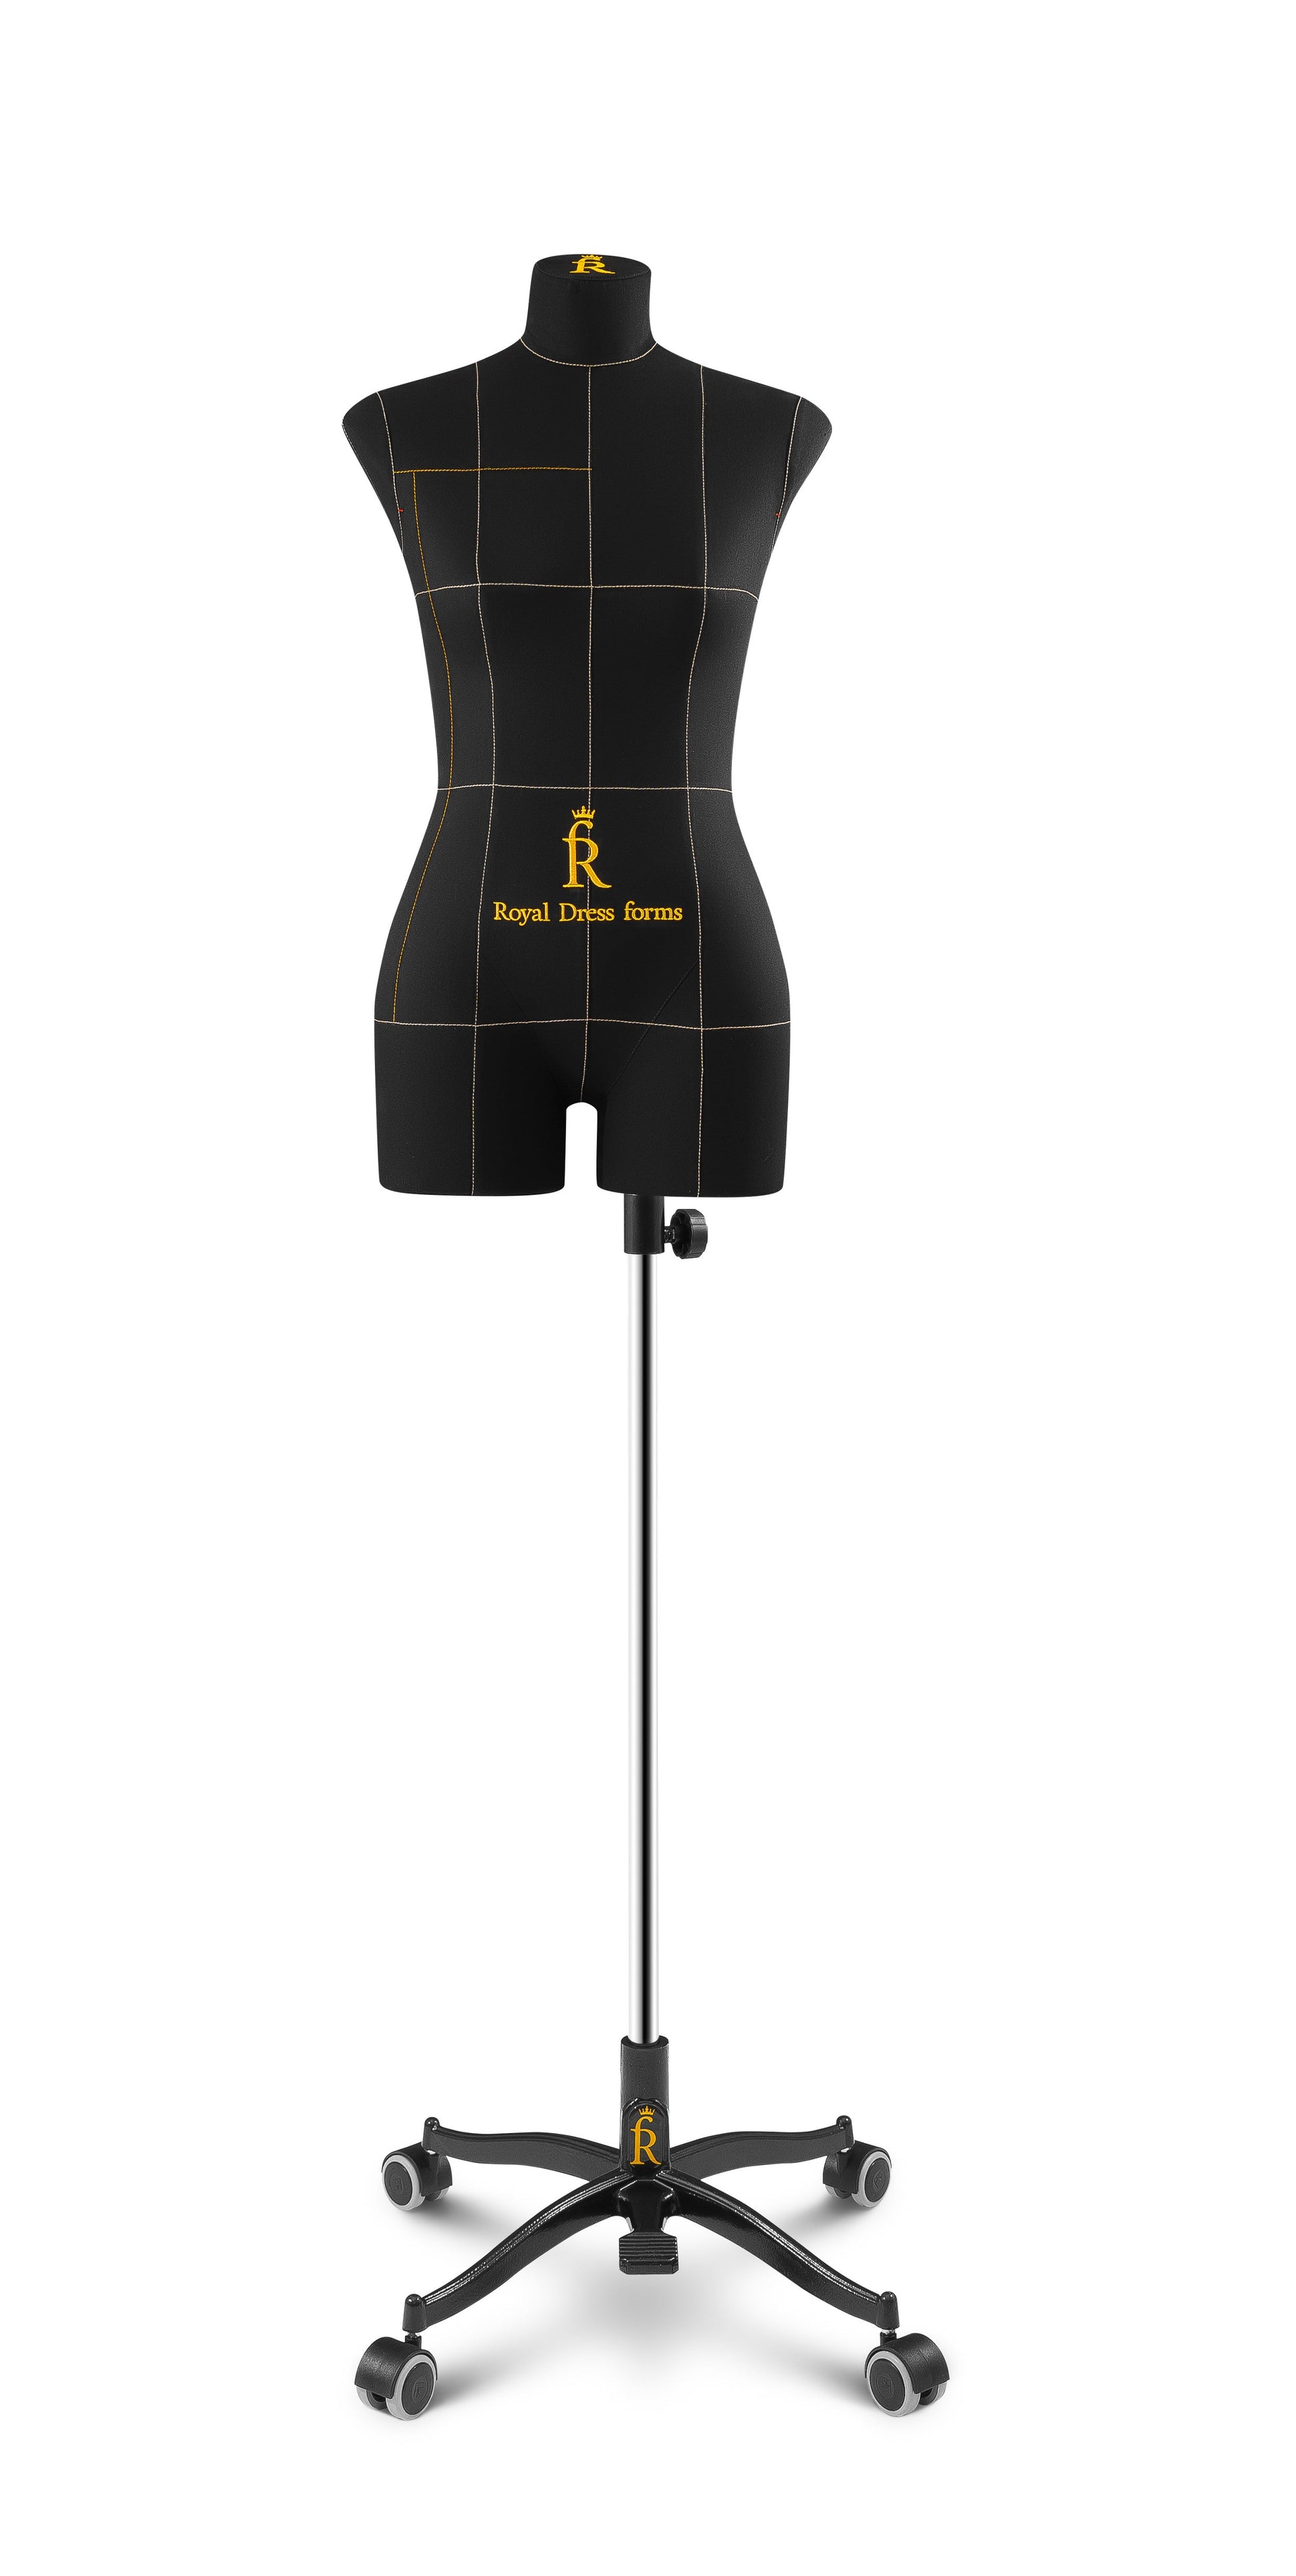 Monica | Royal Dress forms. Made of elastic polymer material. Resistant to iron and garment steamer. Compressibility. Unique handmade cotton cover with balance lines. The cover is water-repellent. Sizes: XXS - XXXL* (34 - 48 EU; 2 - 16 US). Anatomical body shape.